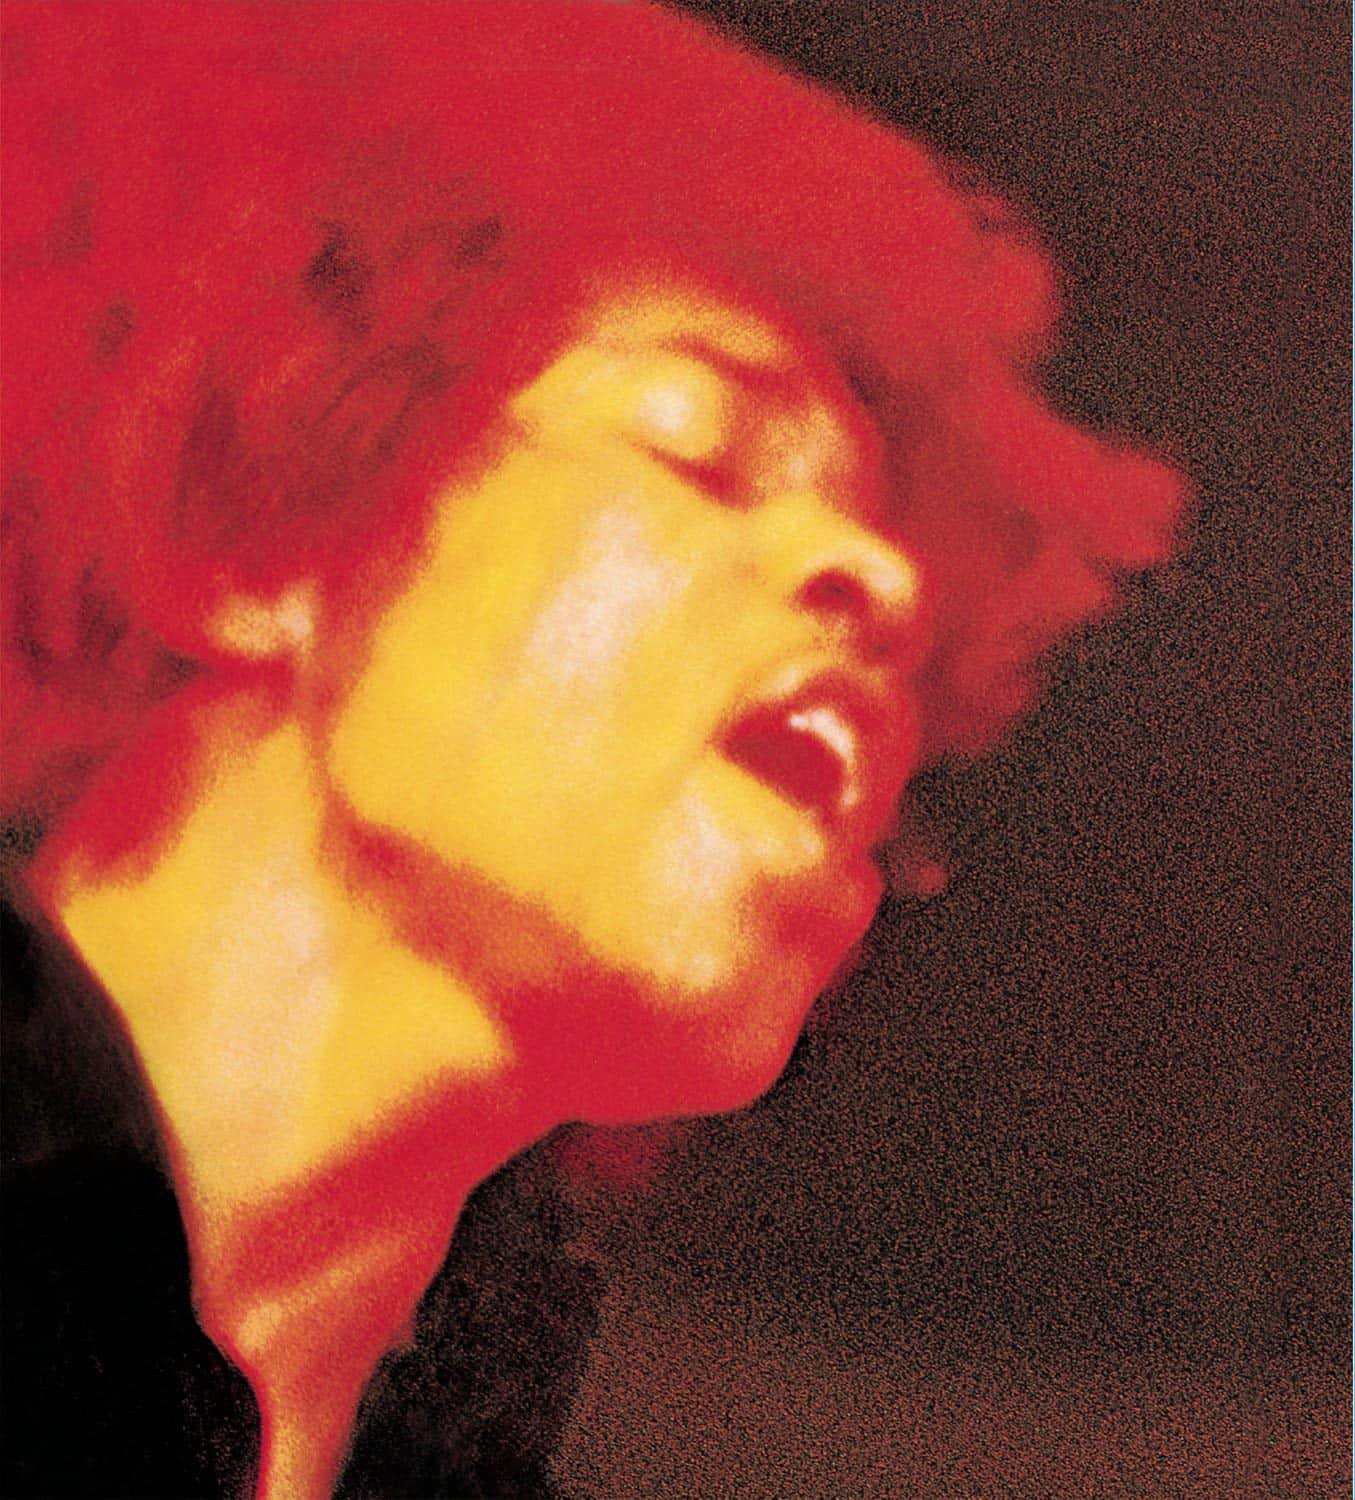 Vinyl Reviews - The Jimi Hendrix Experience - Electric Ladyland